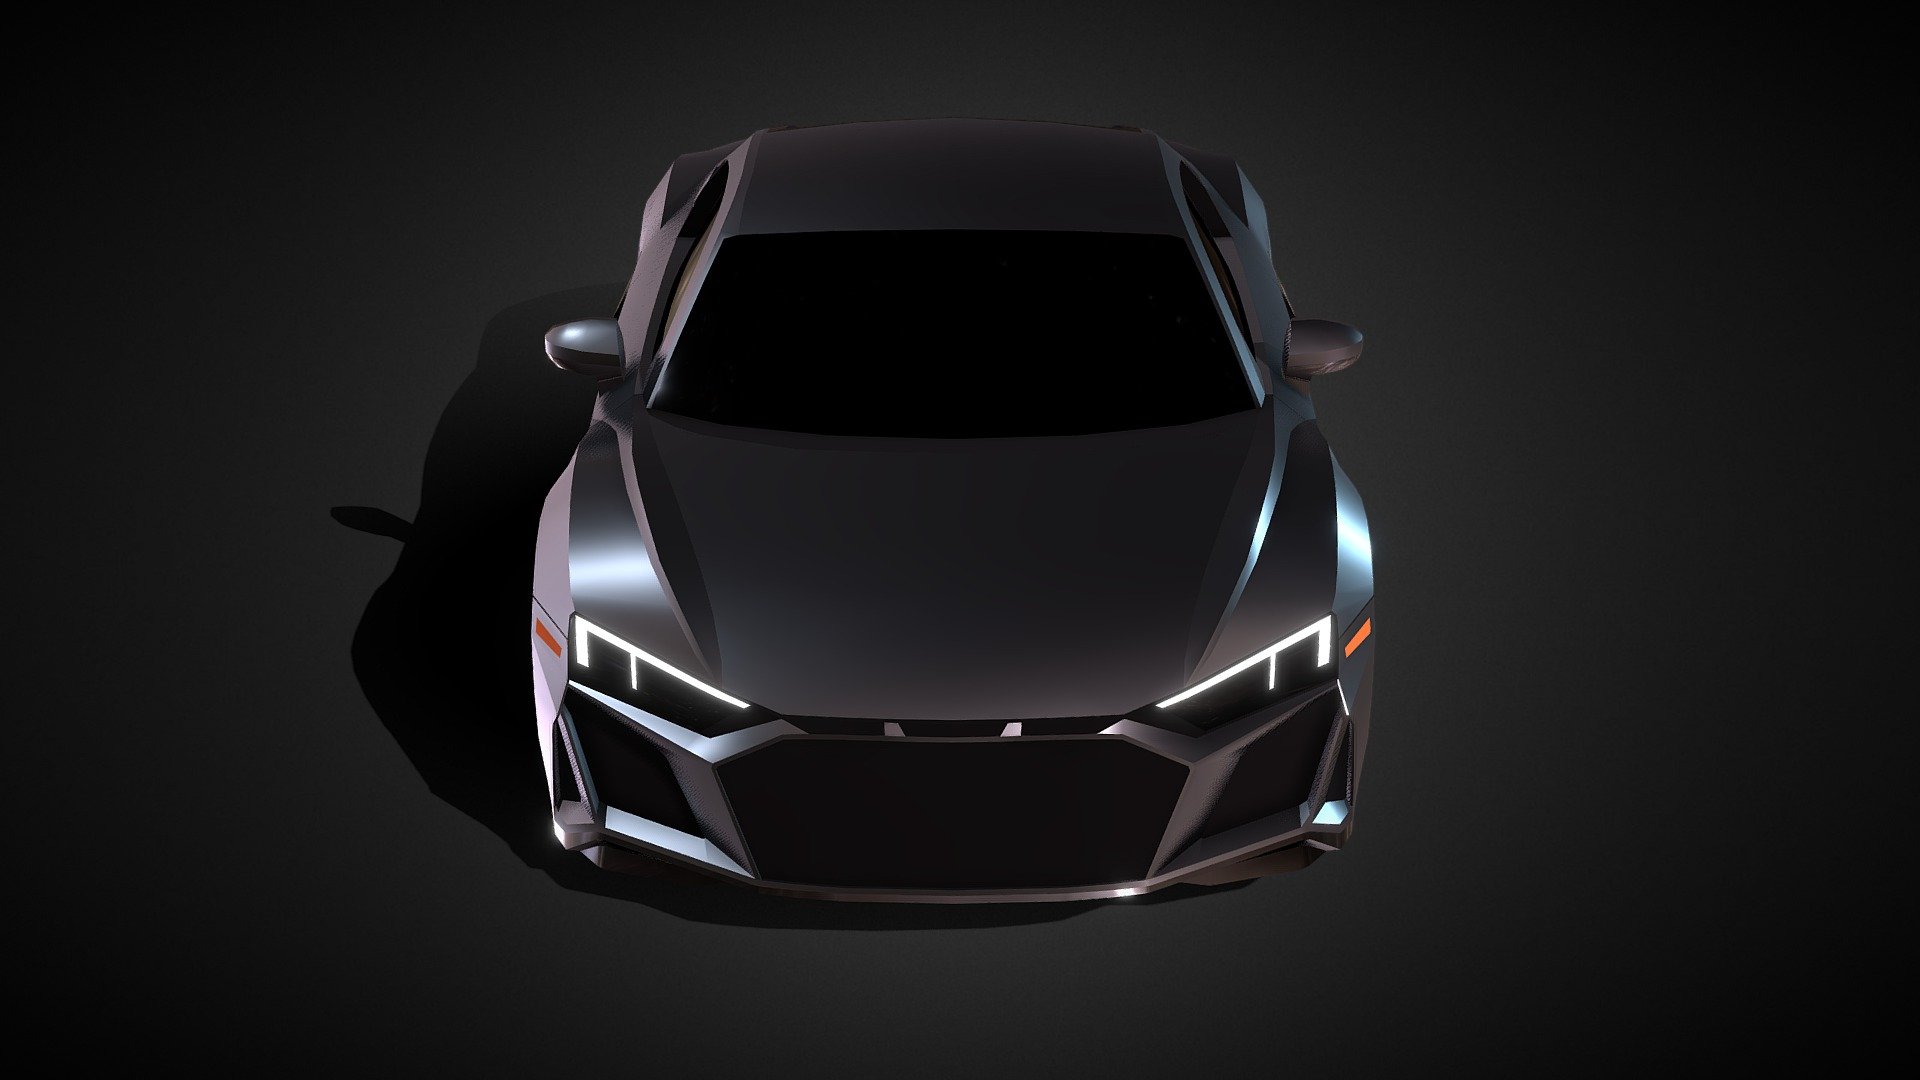 Low-poly 3d model of Audi R8 created in Blender 3.6

Polygons: 6,175 / Vertices: 7,119 / Triangles: 13,088 - Audi R8 (low-poly) - 3D model by Rossty (@rossty3d) 3d model